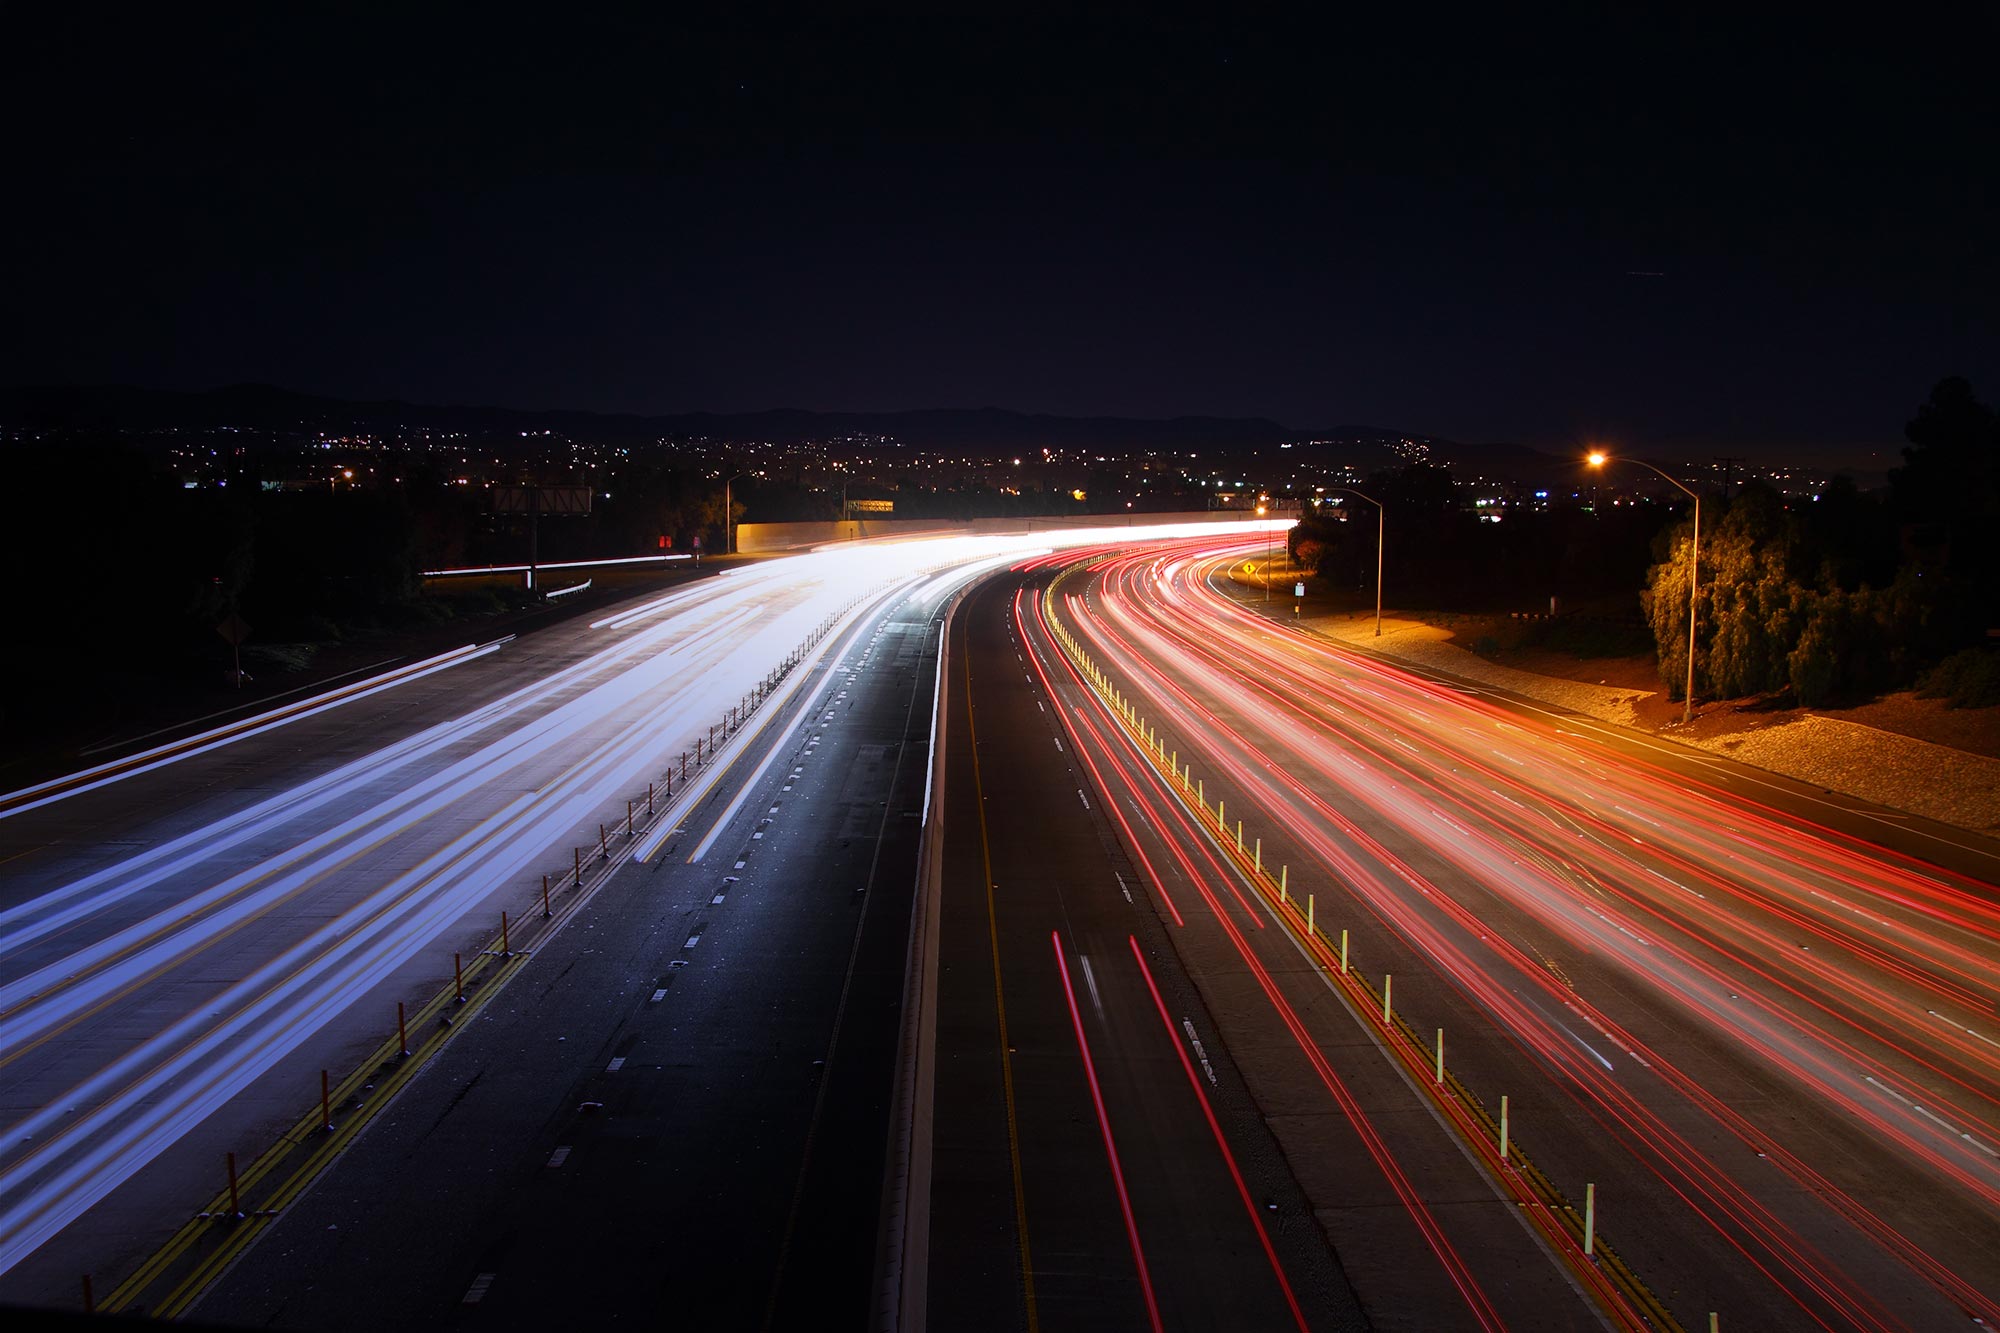 Highway at night with blurred headlights from a distance